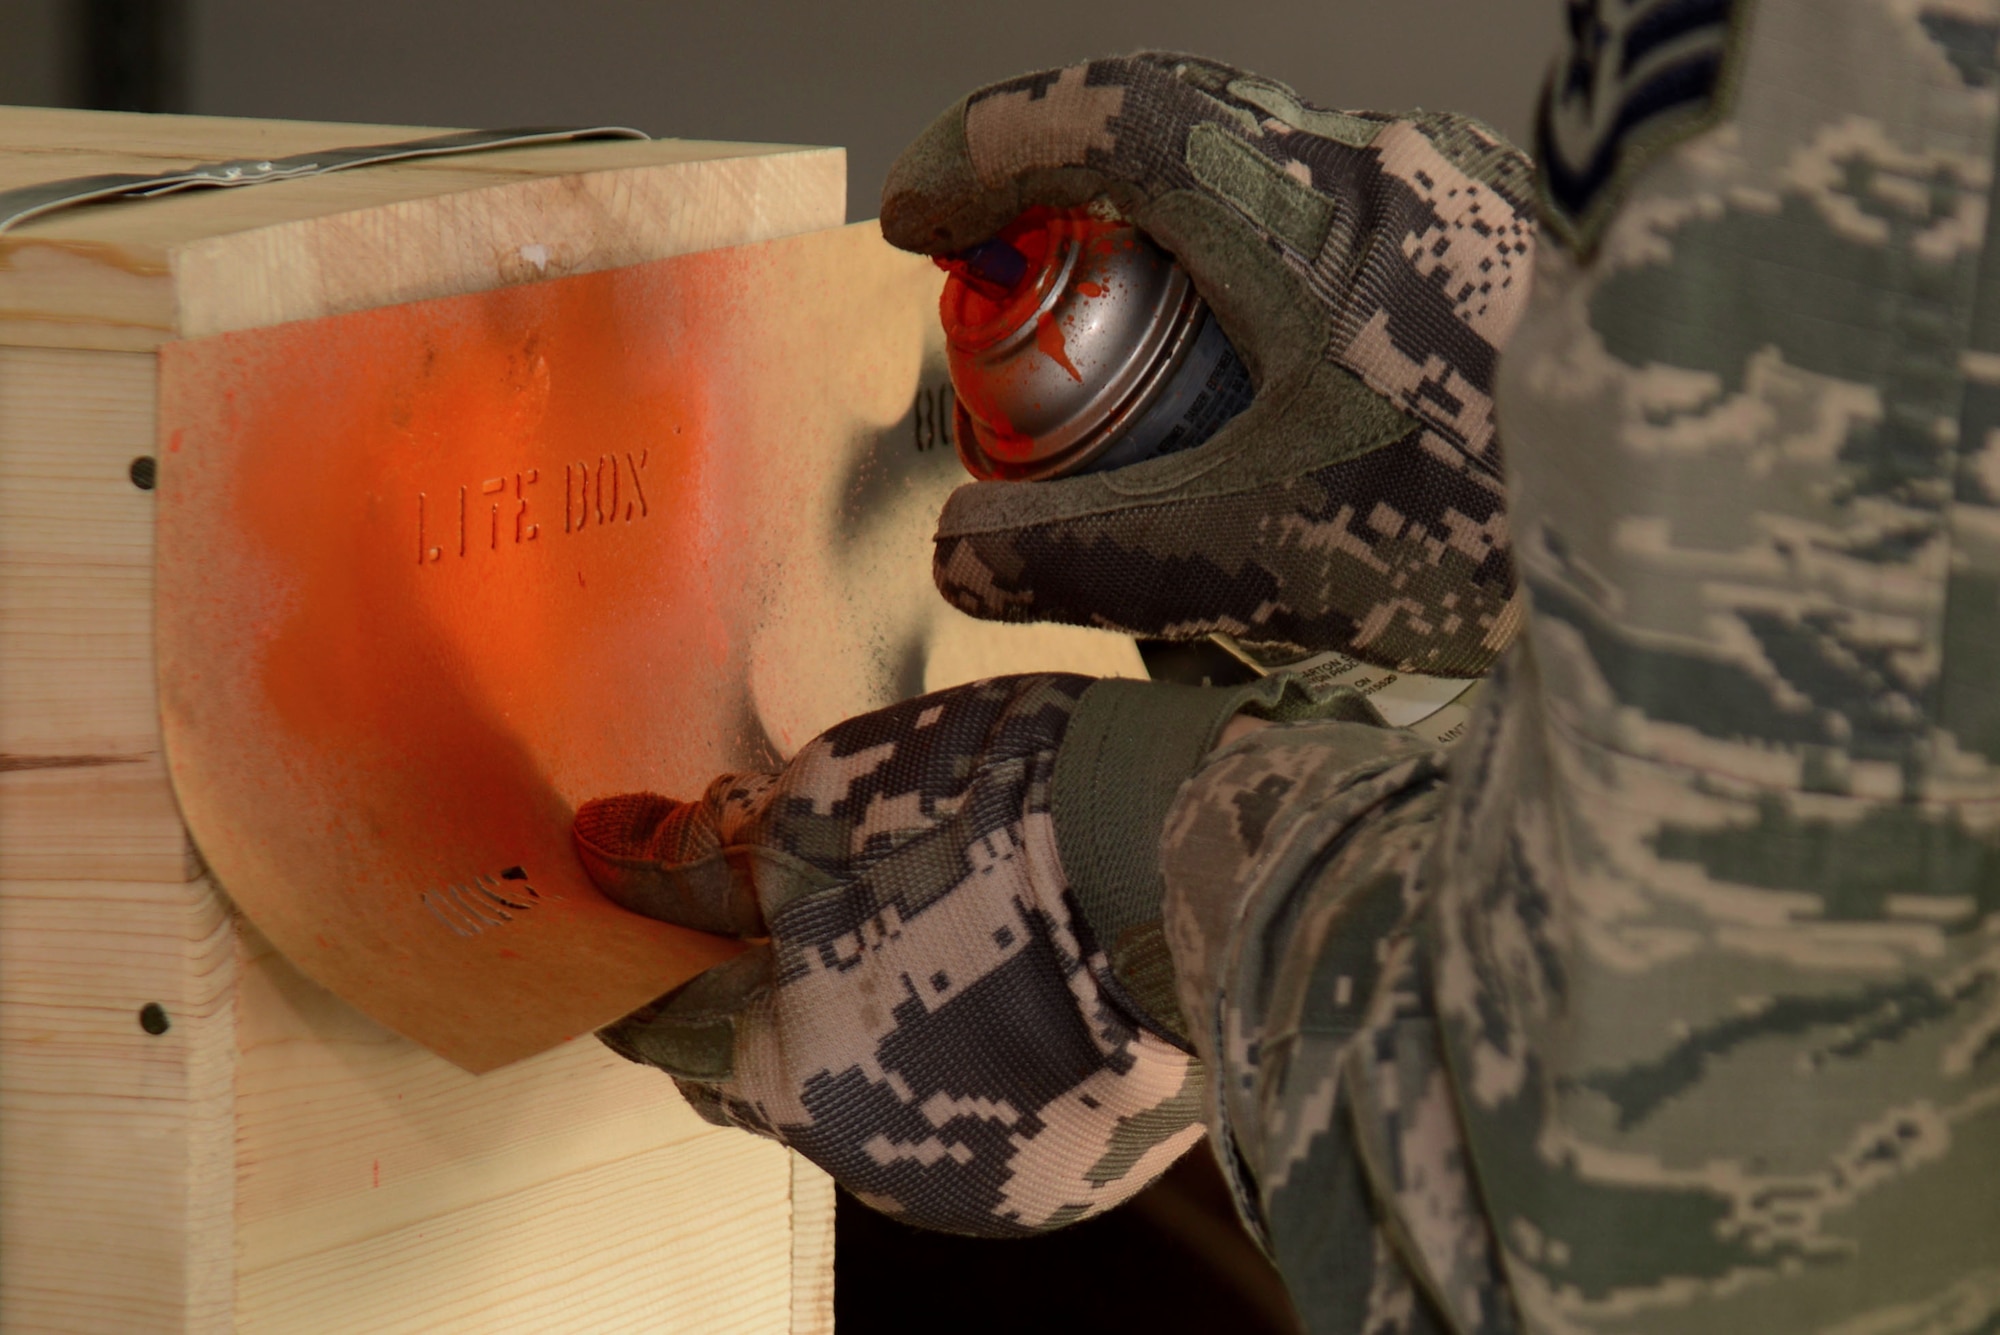 U.S. Air Force Staff Sgt. Ralph Simons, 20th Equipment Maintenance Squadron munitions inspector, uses a template to spray-paint words onto a crate at Shaw Air Force Base, S.C., Feb. 6, 2017. The words, “LITE BOX,” indicate the crate has less than a full set of munitions. (U.S. Air Force photo by Airman 1st Class Kathryn R.C. Reaves)